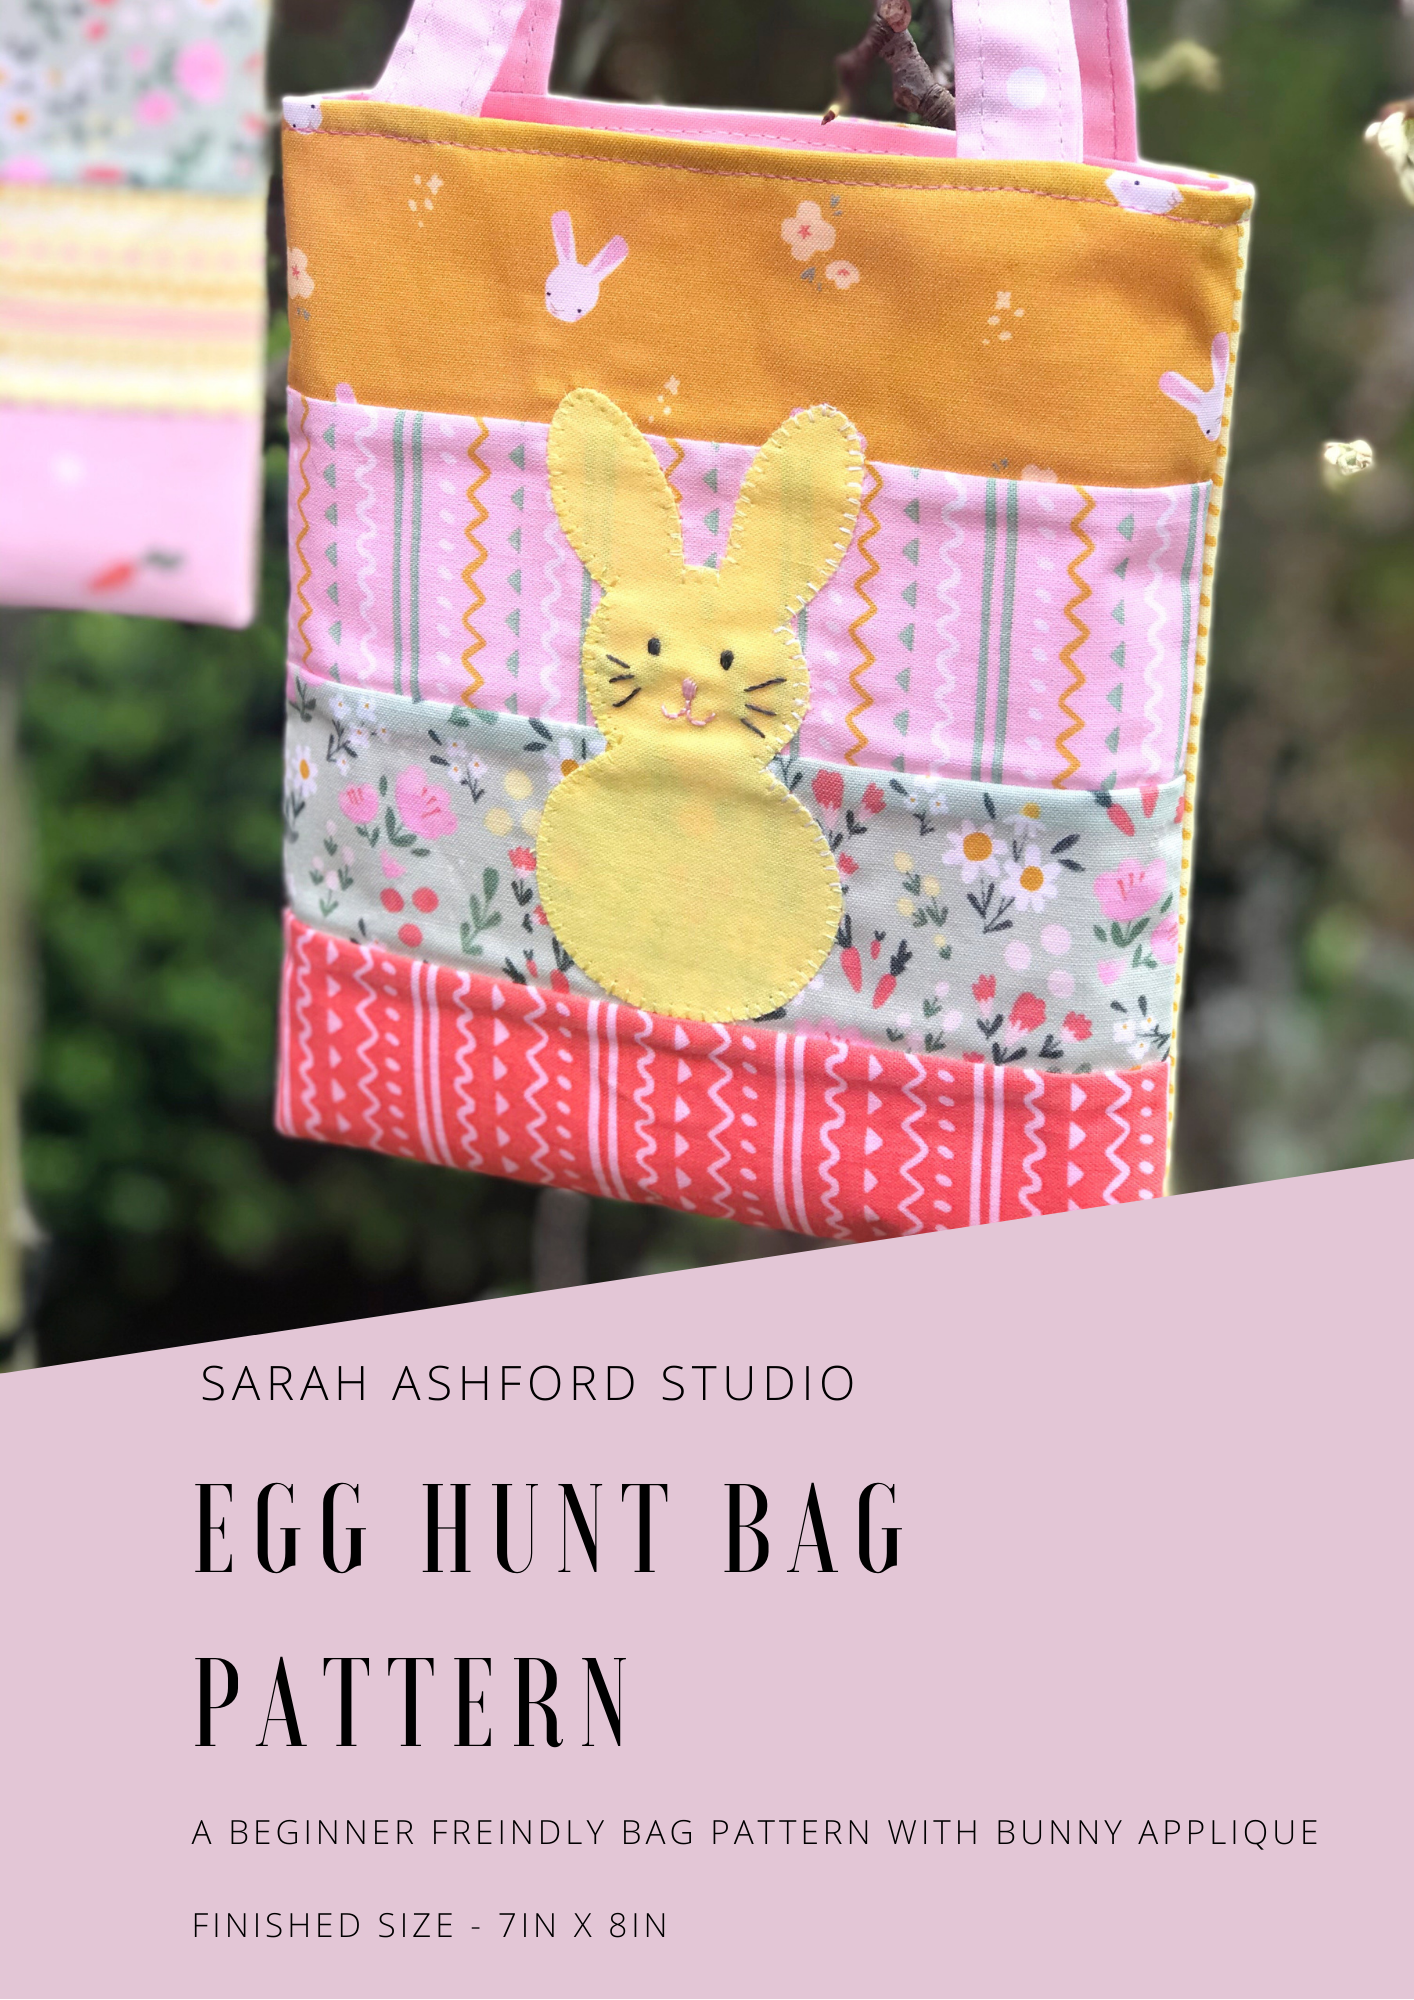 The egg hunt bag hangs from a tree.  It has an applique rabbit in the centre, who has a cute face, pink nose and whiskers.  The bag is made up of strips of summer themed fabric. 